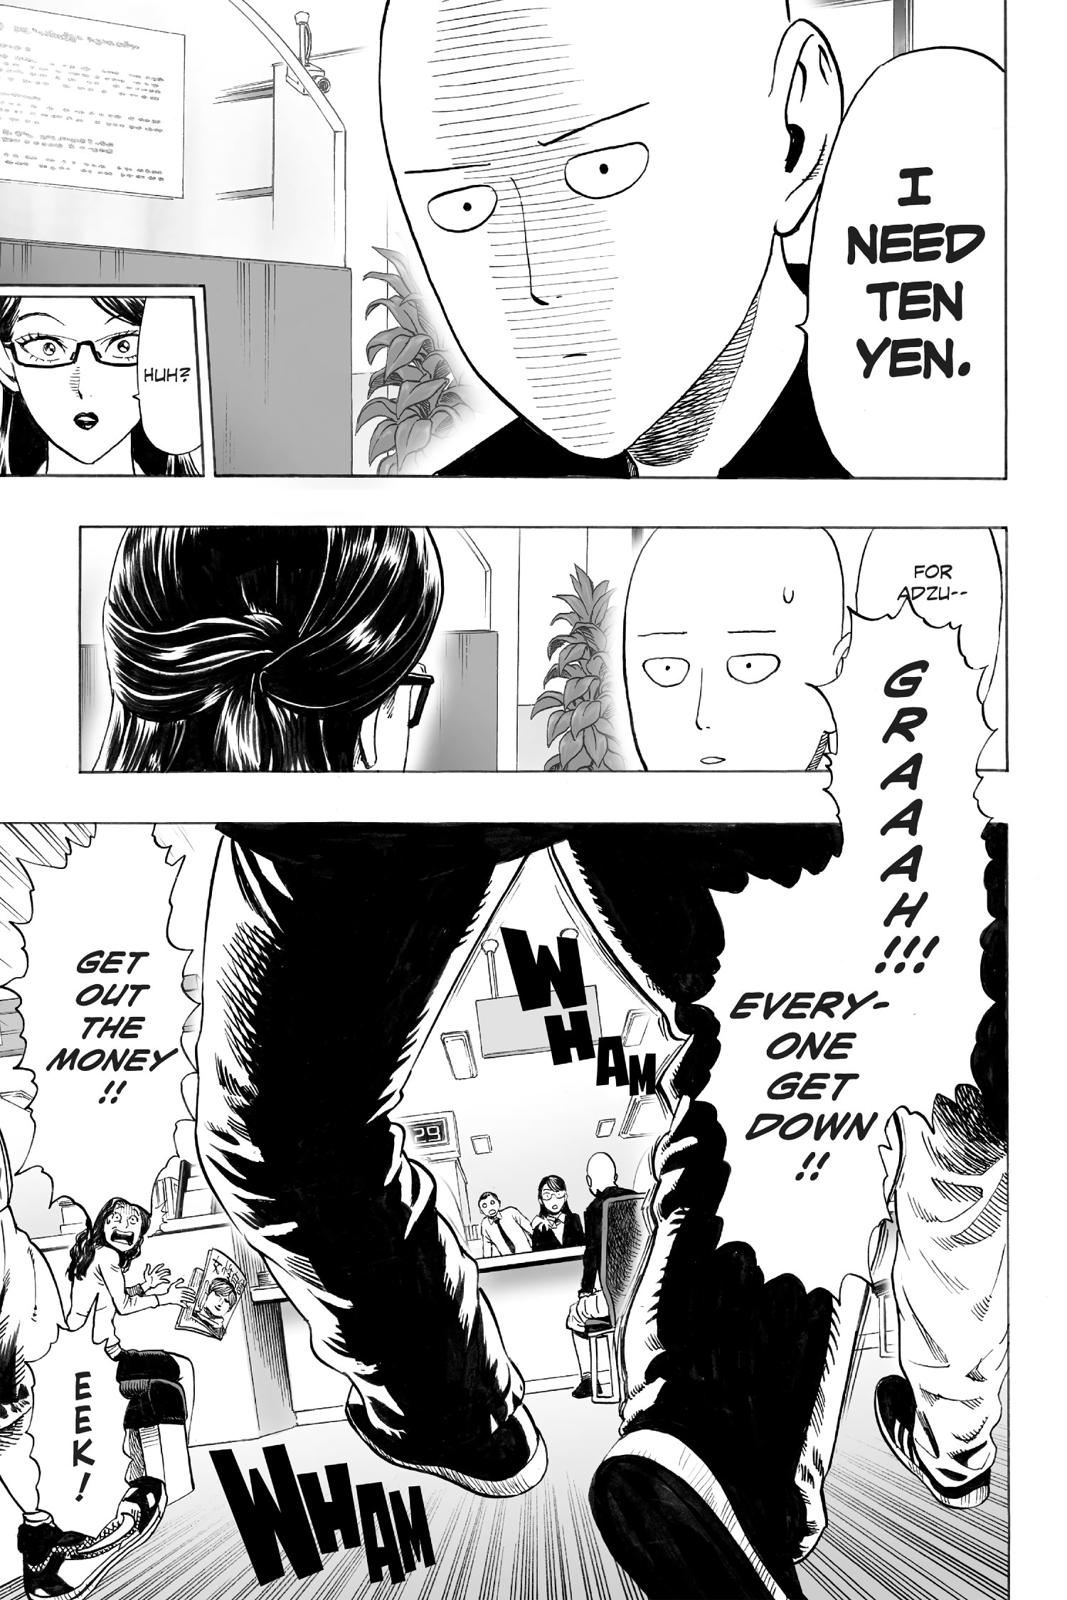 One-Punch Man, Punch 29 image 29